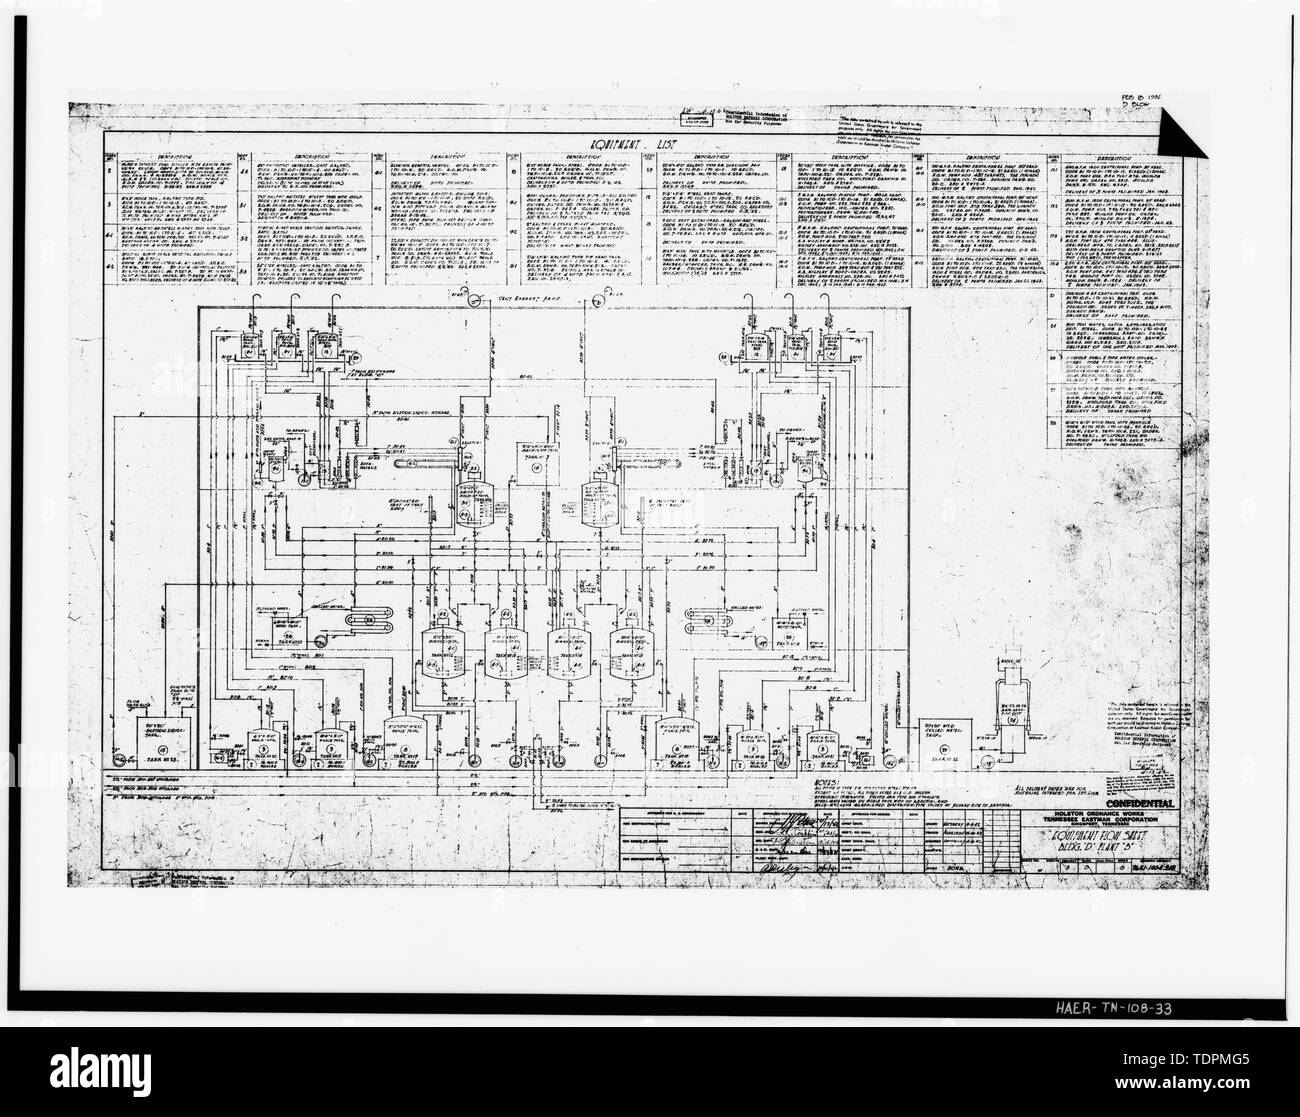 Photograph of a line drawing. 'EQUIPMENT FLOW SHEET, BUILDING 'D', PLANT 'B'. Holston Ordnance Works, Tennessee Eastman Corporation. August 4, 1942. Delineator- Hattaway. Drawing - 7651-1004.218. - Holston Army Ammunition Plant, RDX-and-Composition-B Manufacturing Line 9, Kingsport, Sullivan County, TN; Bachmann                              , Werner E; Tennessee Eastman Corporation; U.S. Department of the Army; National Defense Research Committee; Fraser-Brace Company; Charles T. Main Incorporated; U.S. Army Corps of Engineers; Holston Defense Corporation; Tompkins, Sally Kress, program manage Stock Photo